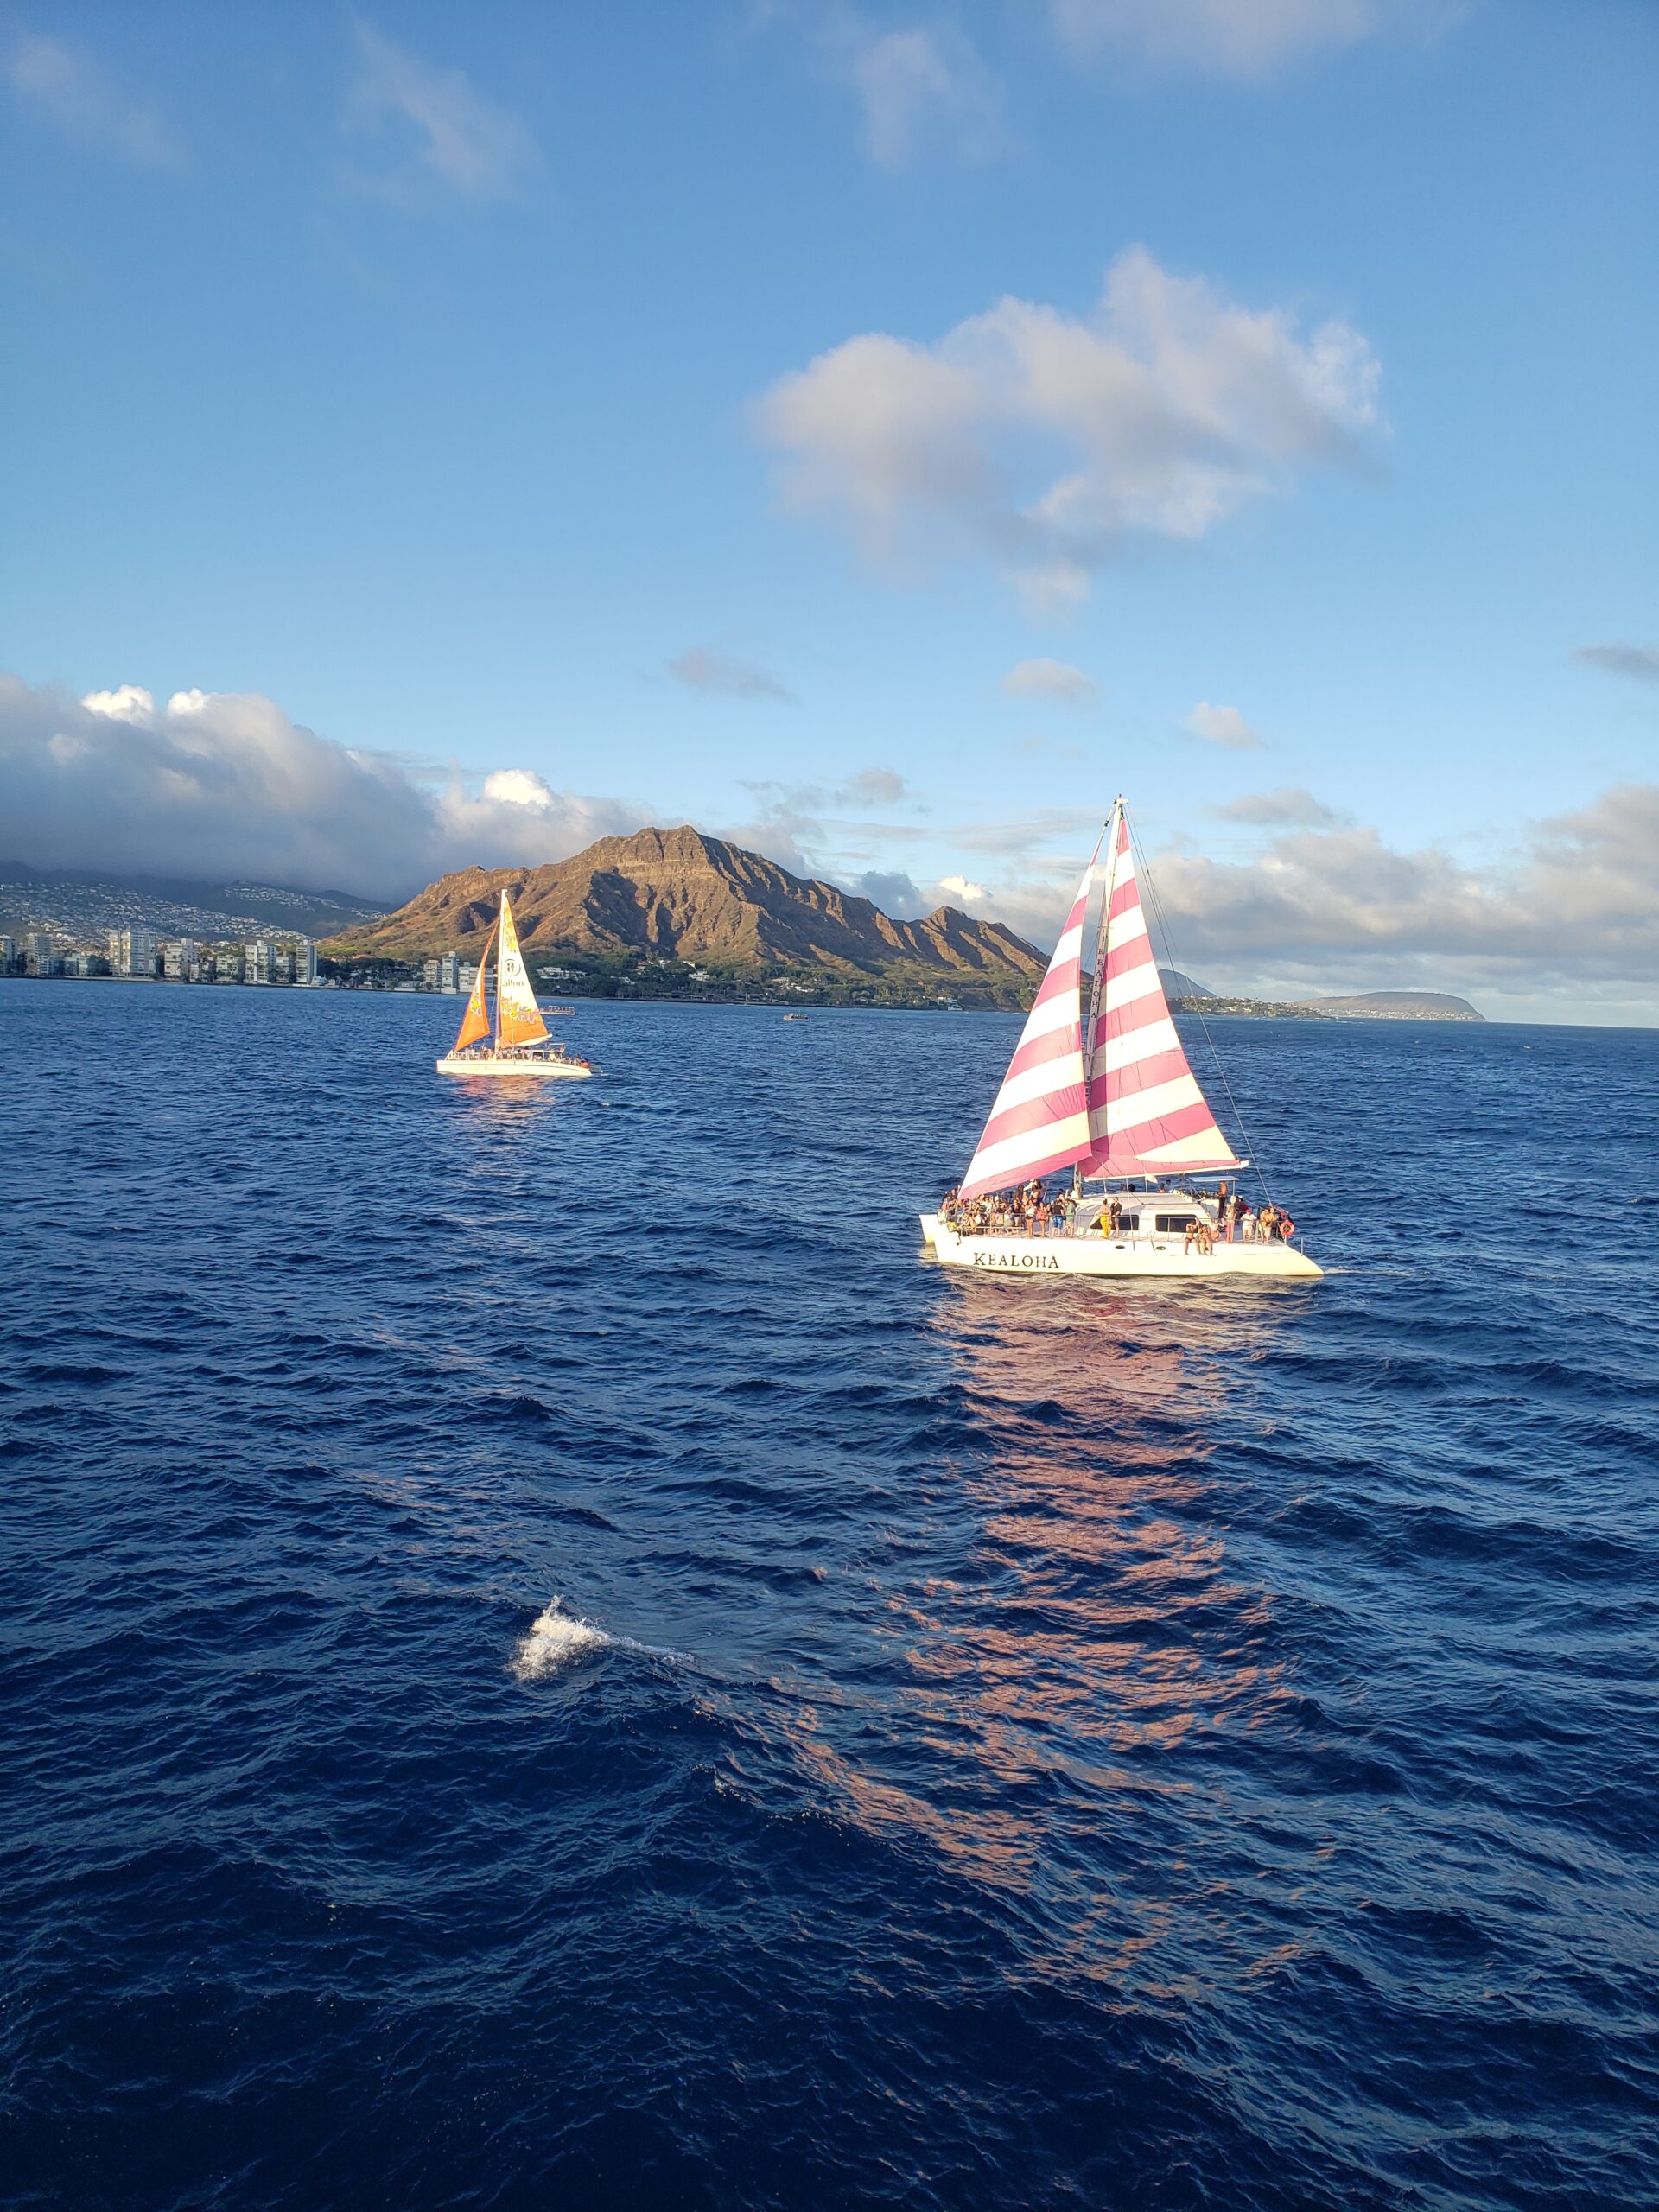 Ships sail Waikiki Harbor with Diamond Head Crater in the background